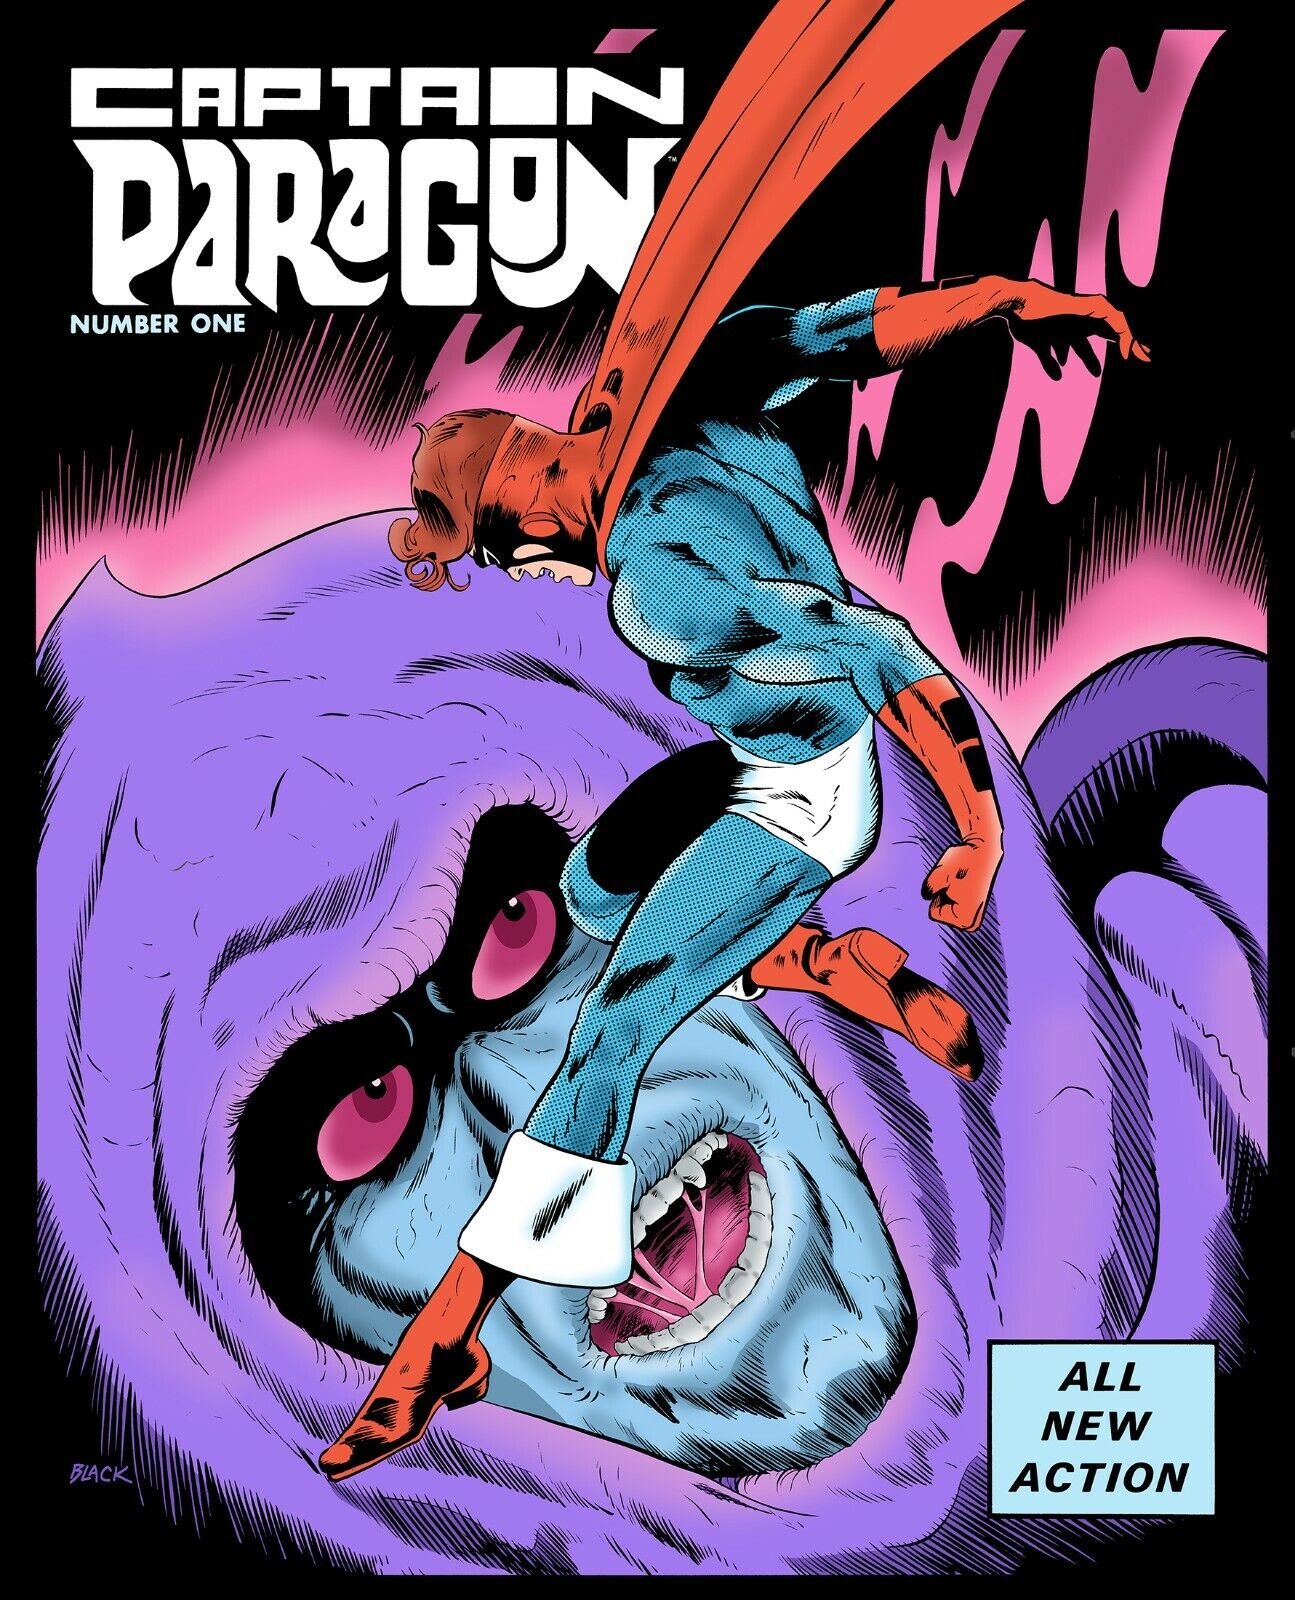 CAPTAIN PARAGON NO. 1 1972 - FULL COLOR REDUX 2021 SIGNED & NUMBERED BILL BLACK 